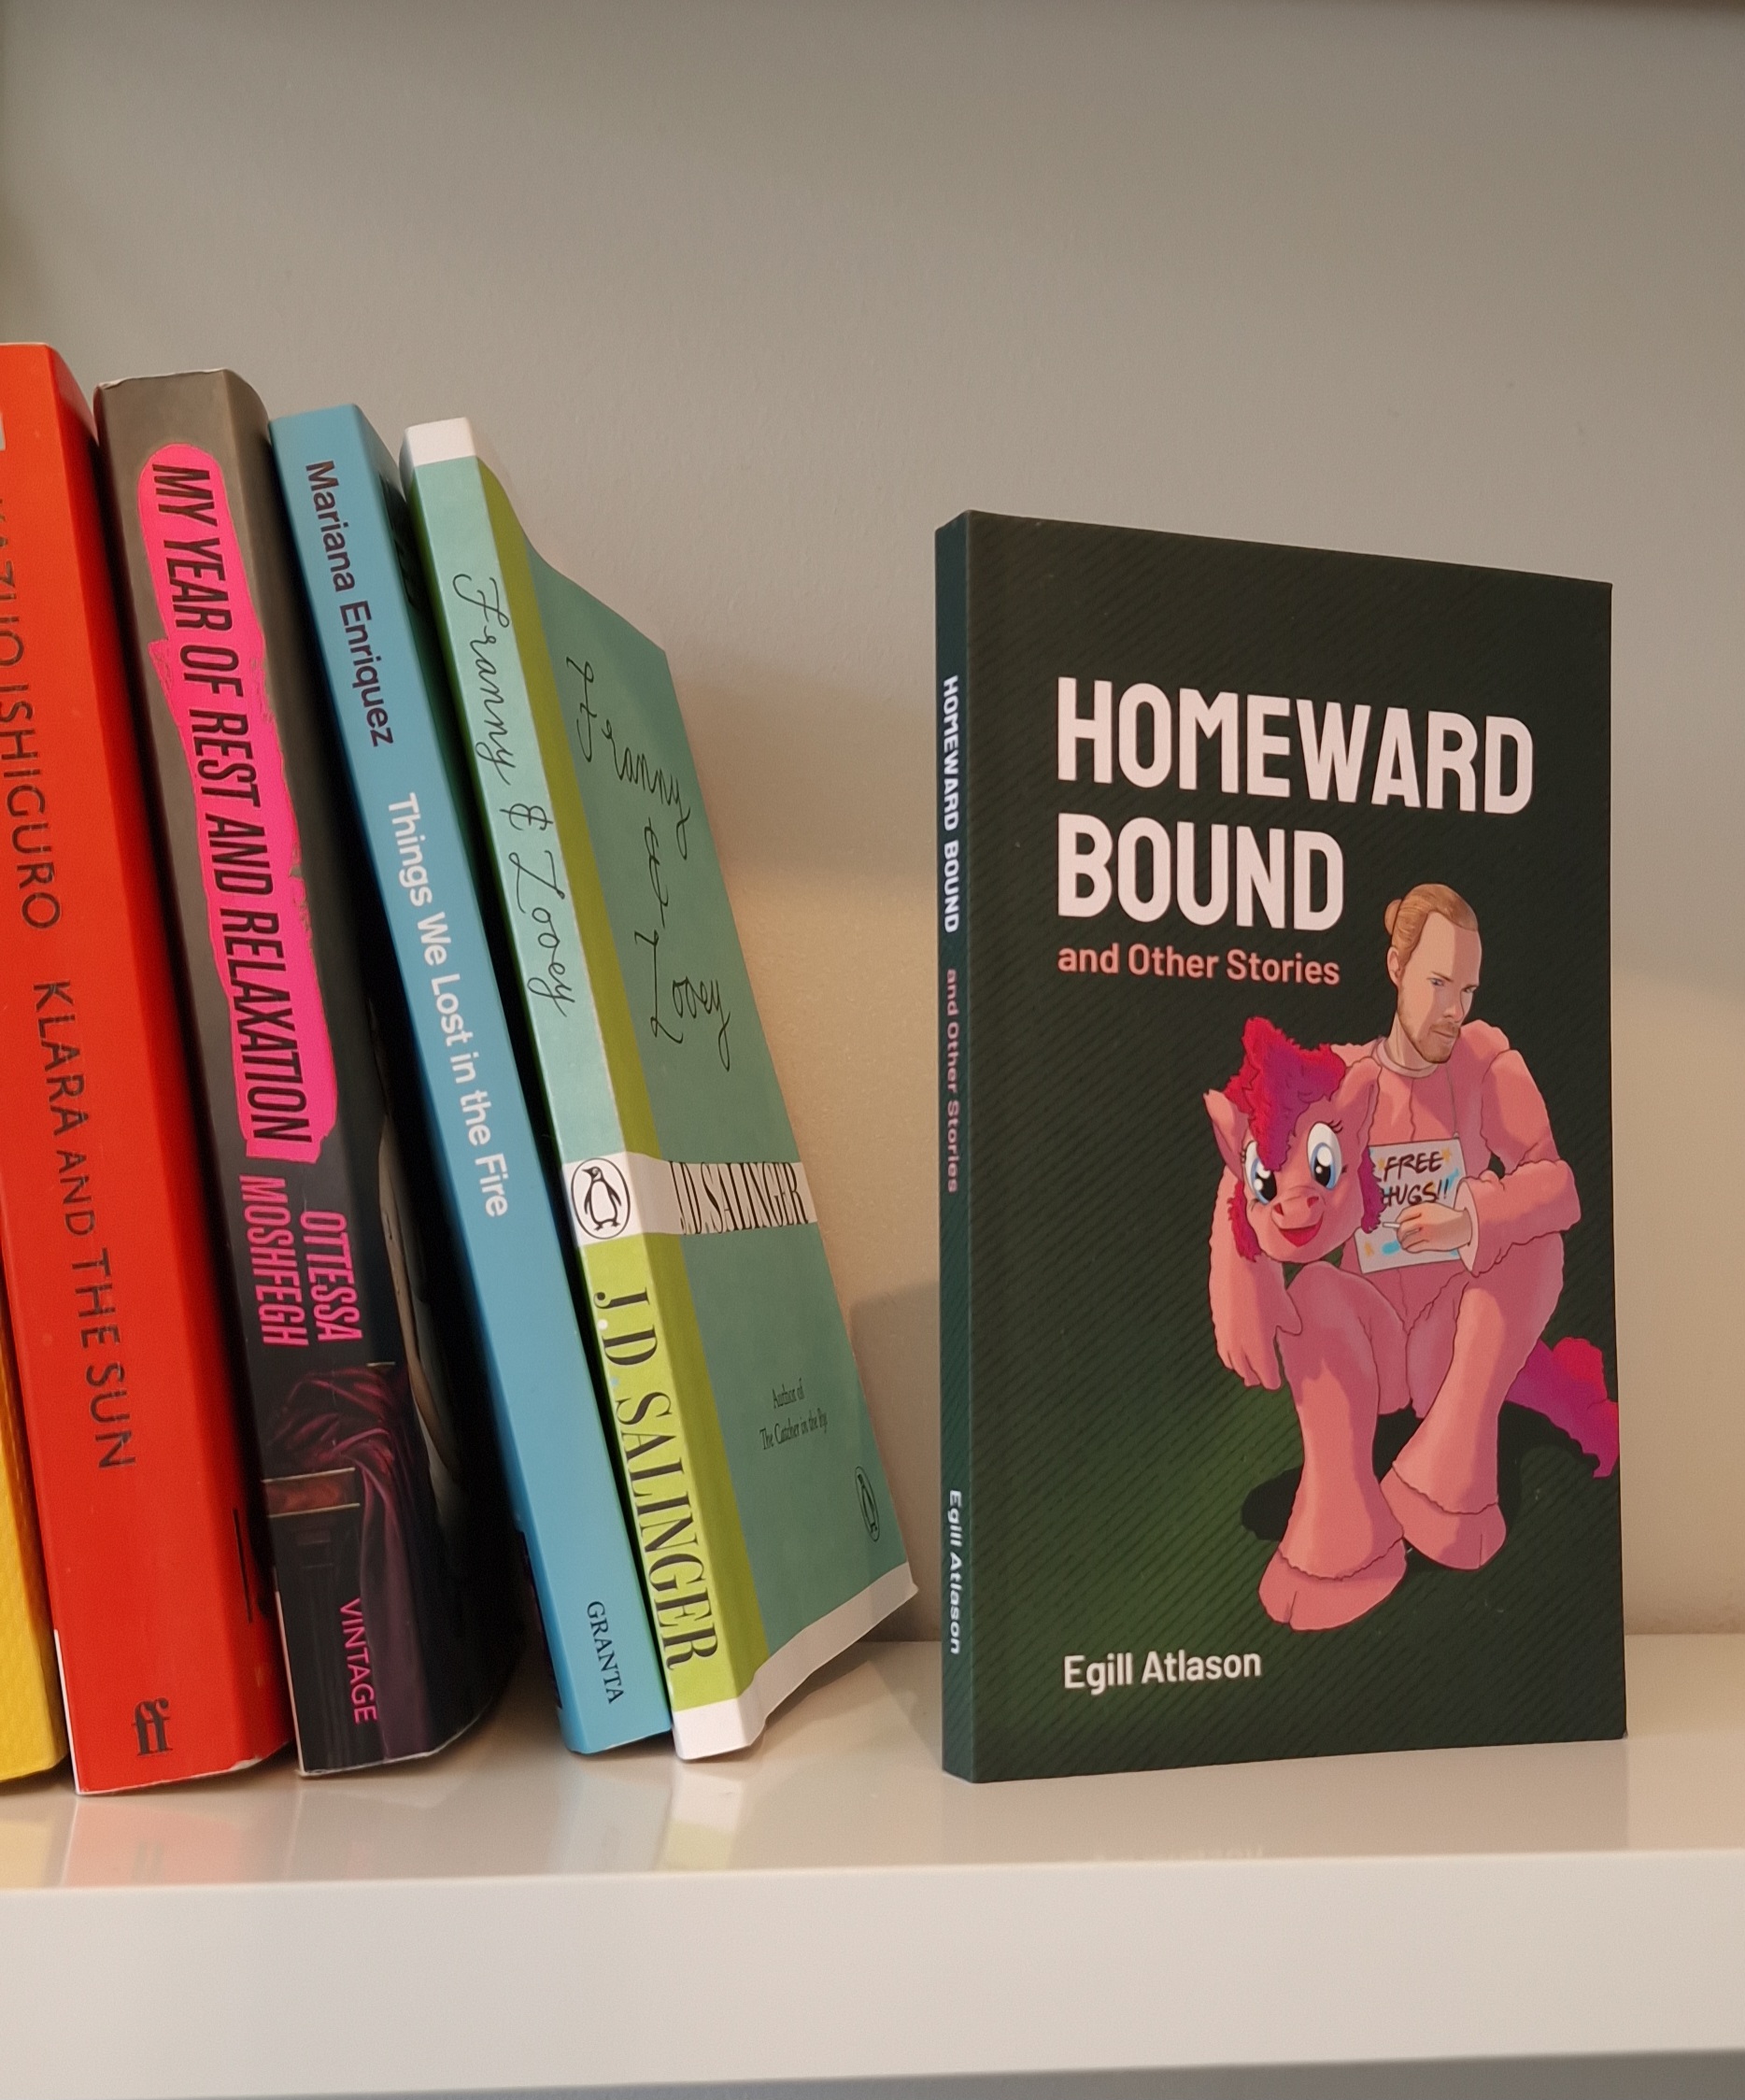 Homeward Bound and Other Stories on a shelf with other books.